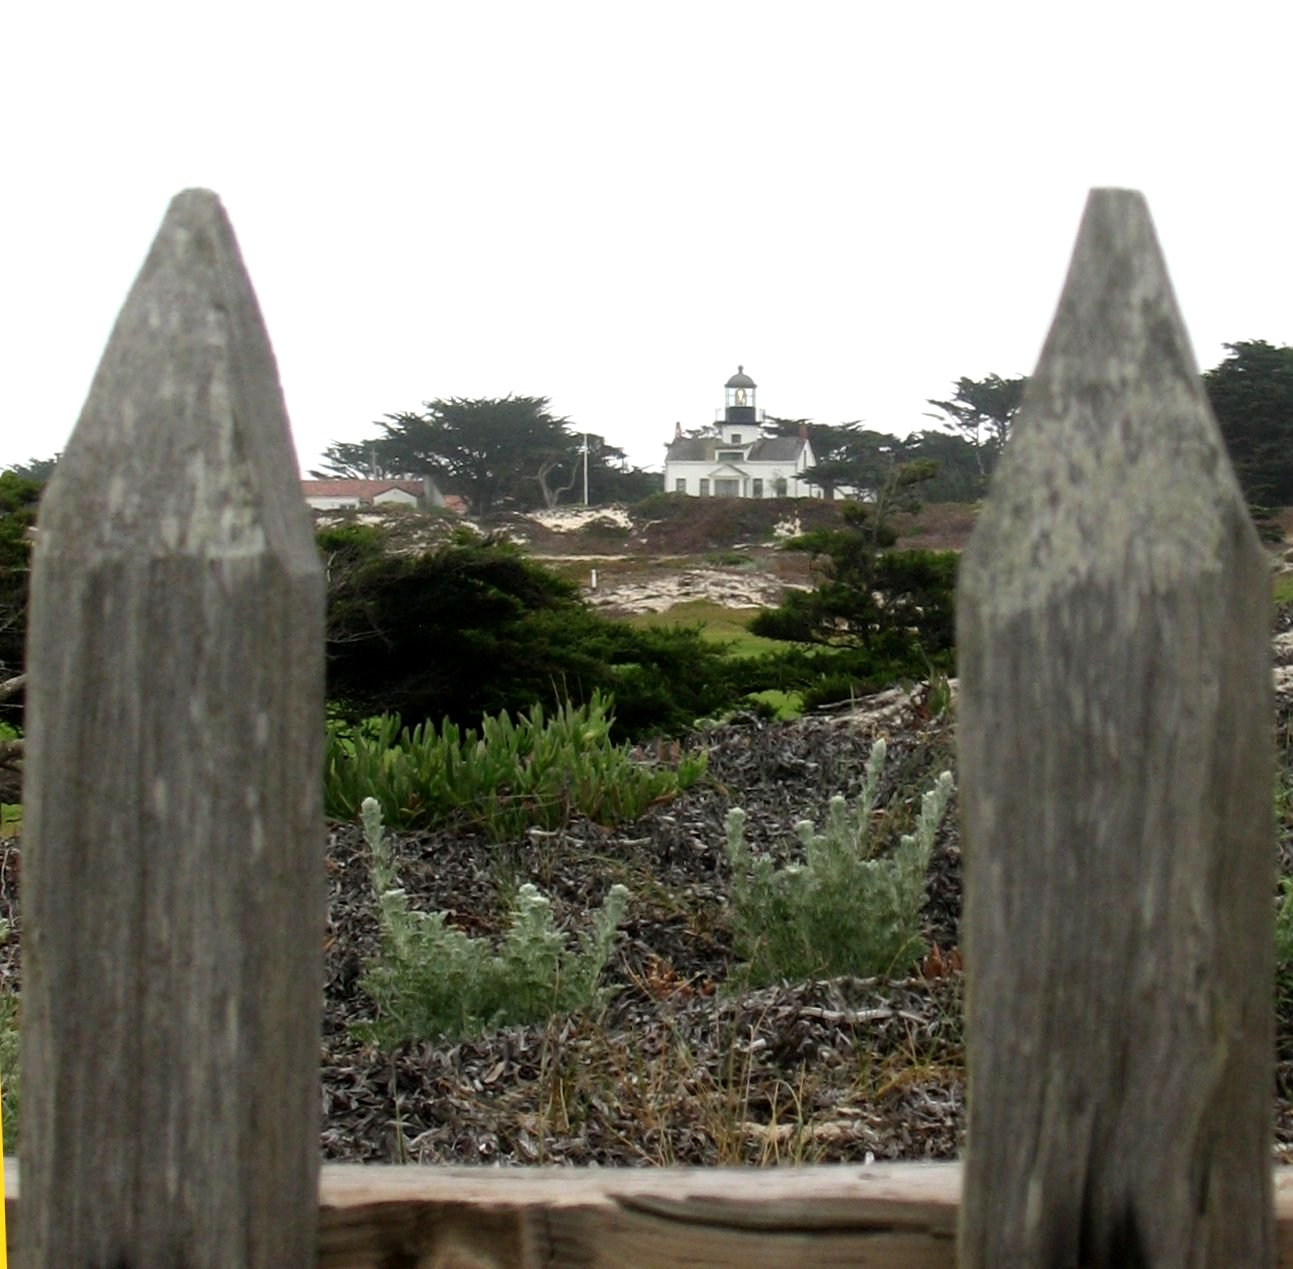 The Point Pinos Lighthouse bracketed between fence posts on theAsilomar Dunes